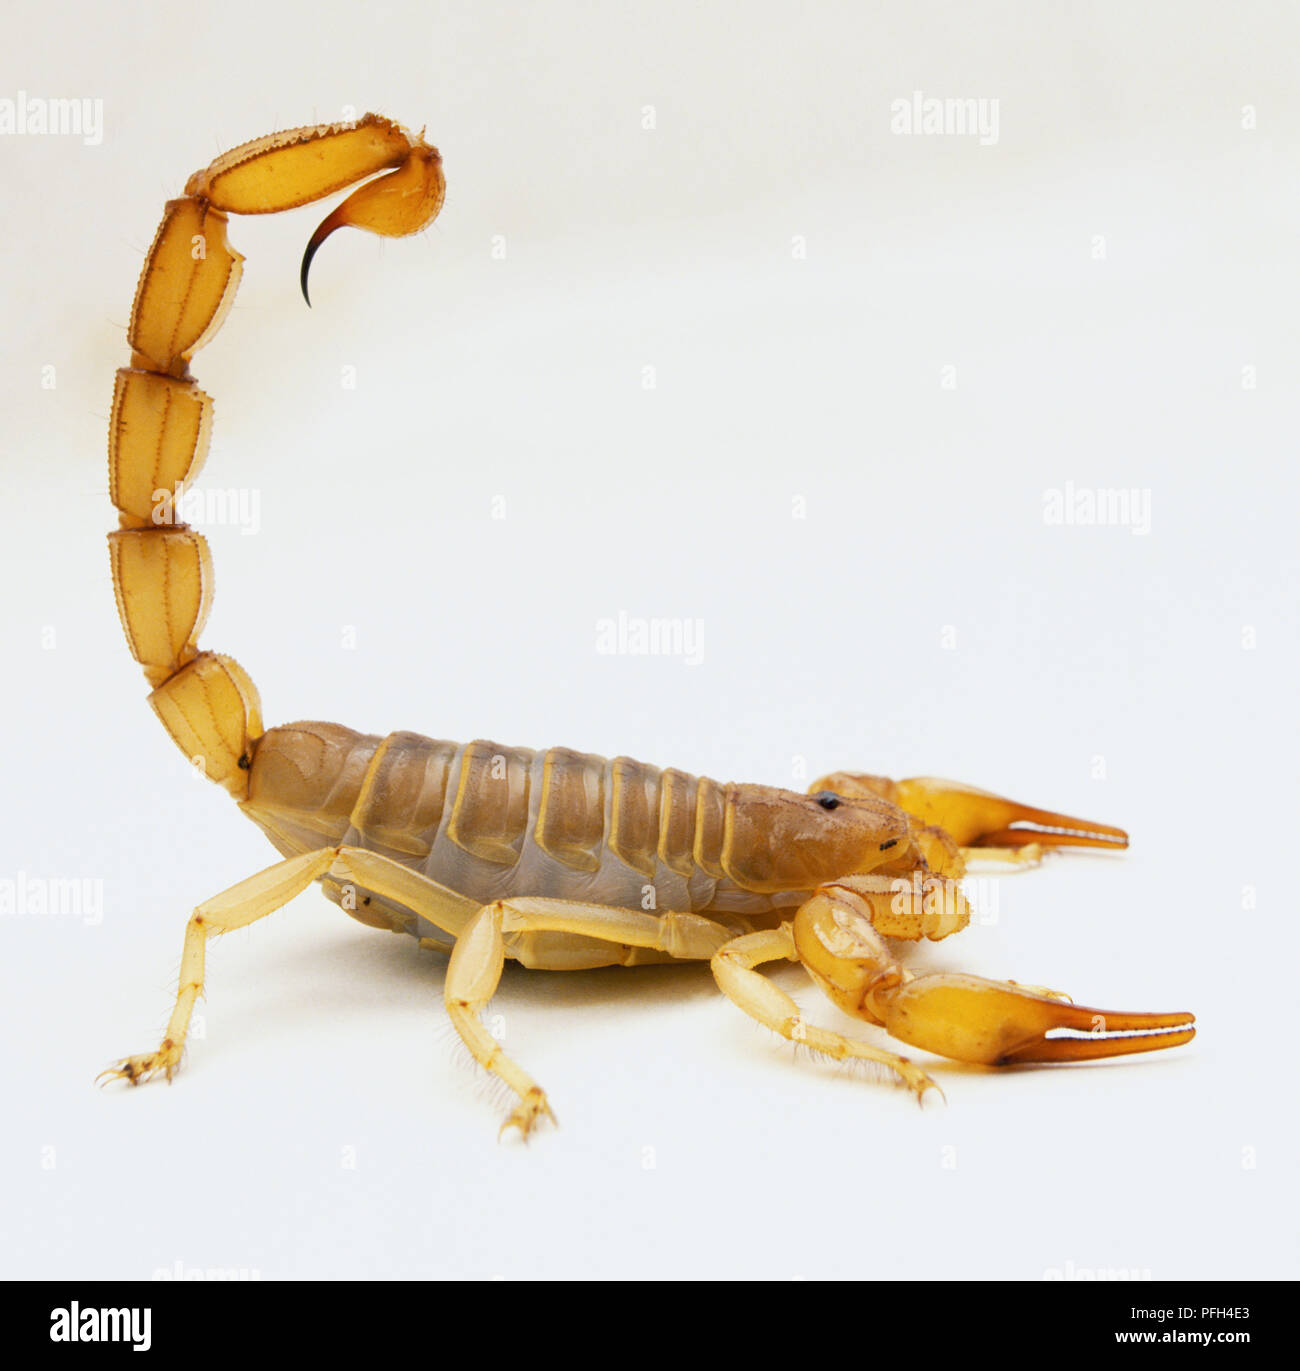 Scorpion Scorpio maurus (or), side view Banque D'Images